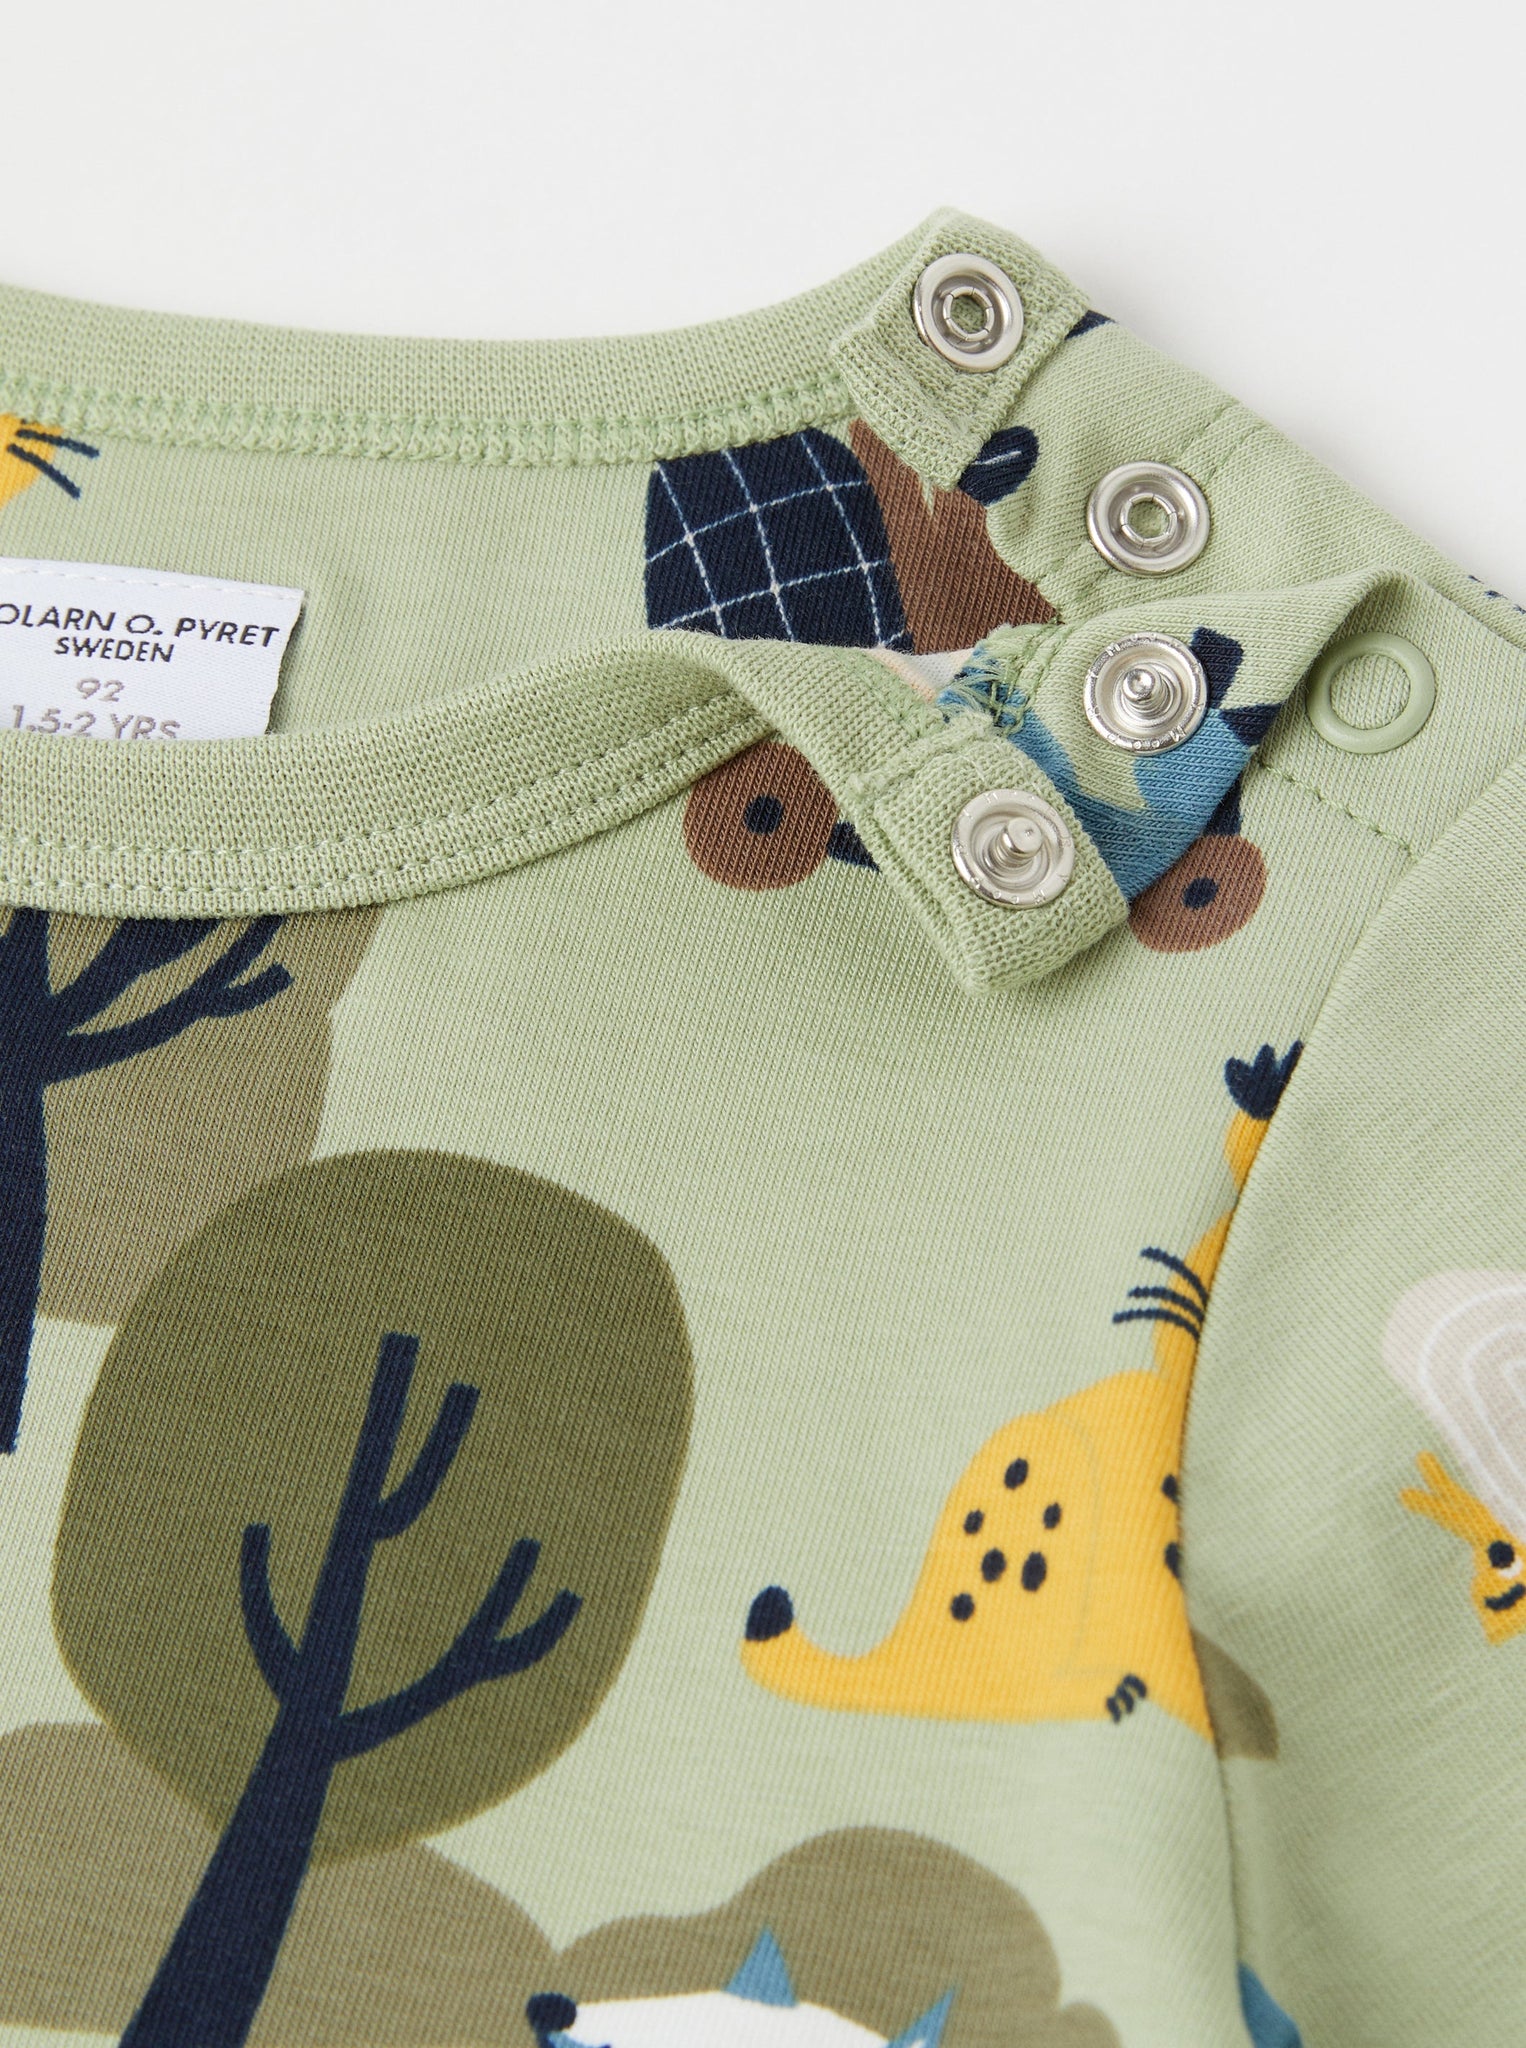 Cotton Animal Print Green Kids Top from the Polarn O. Pyret kidswear collection. Ethically produced kids clothing.